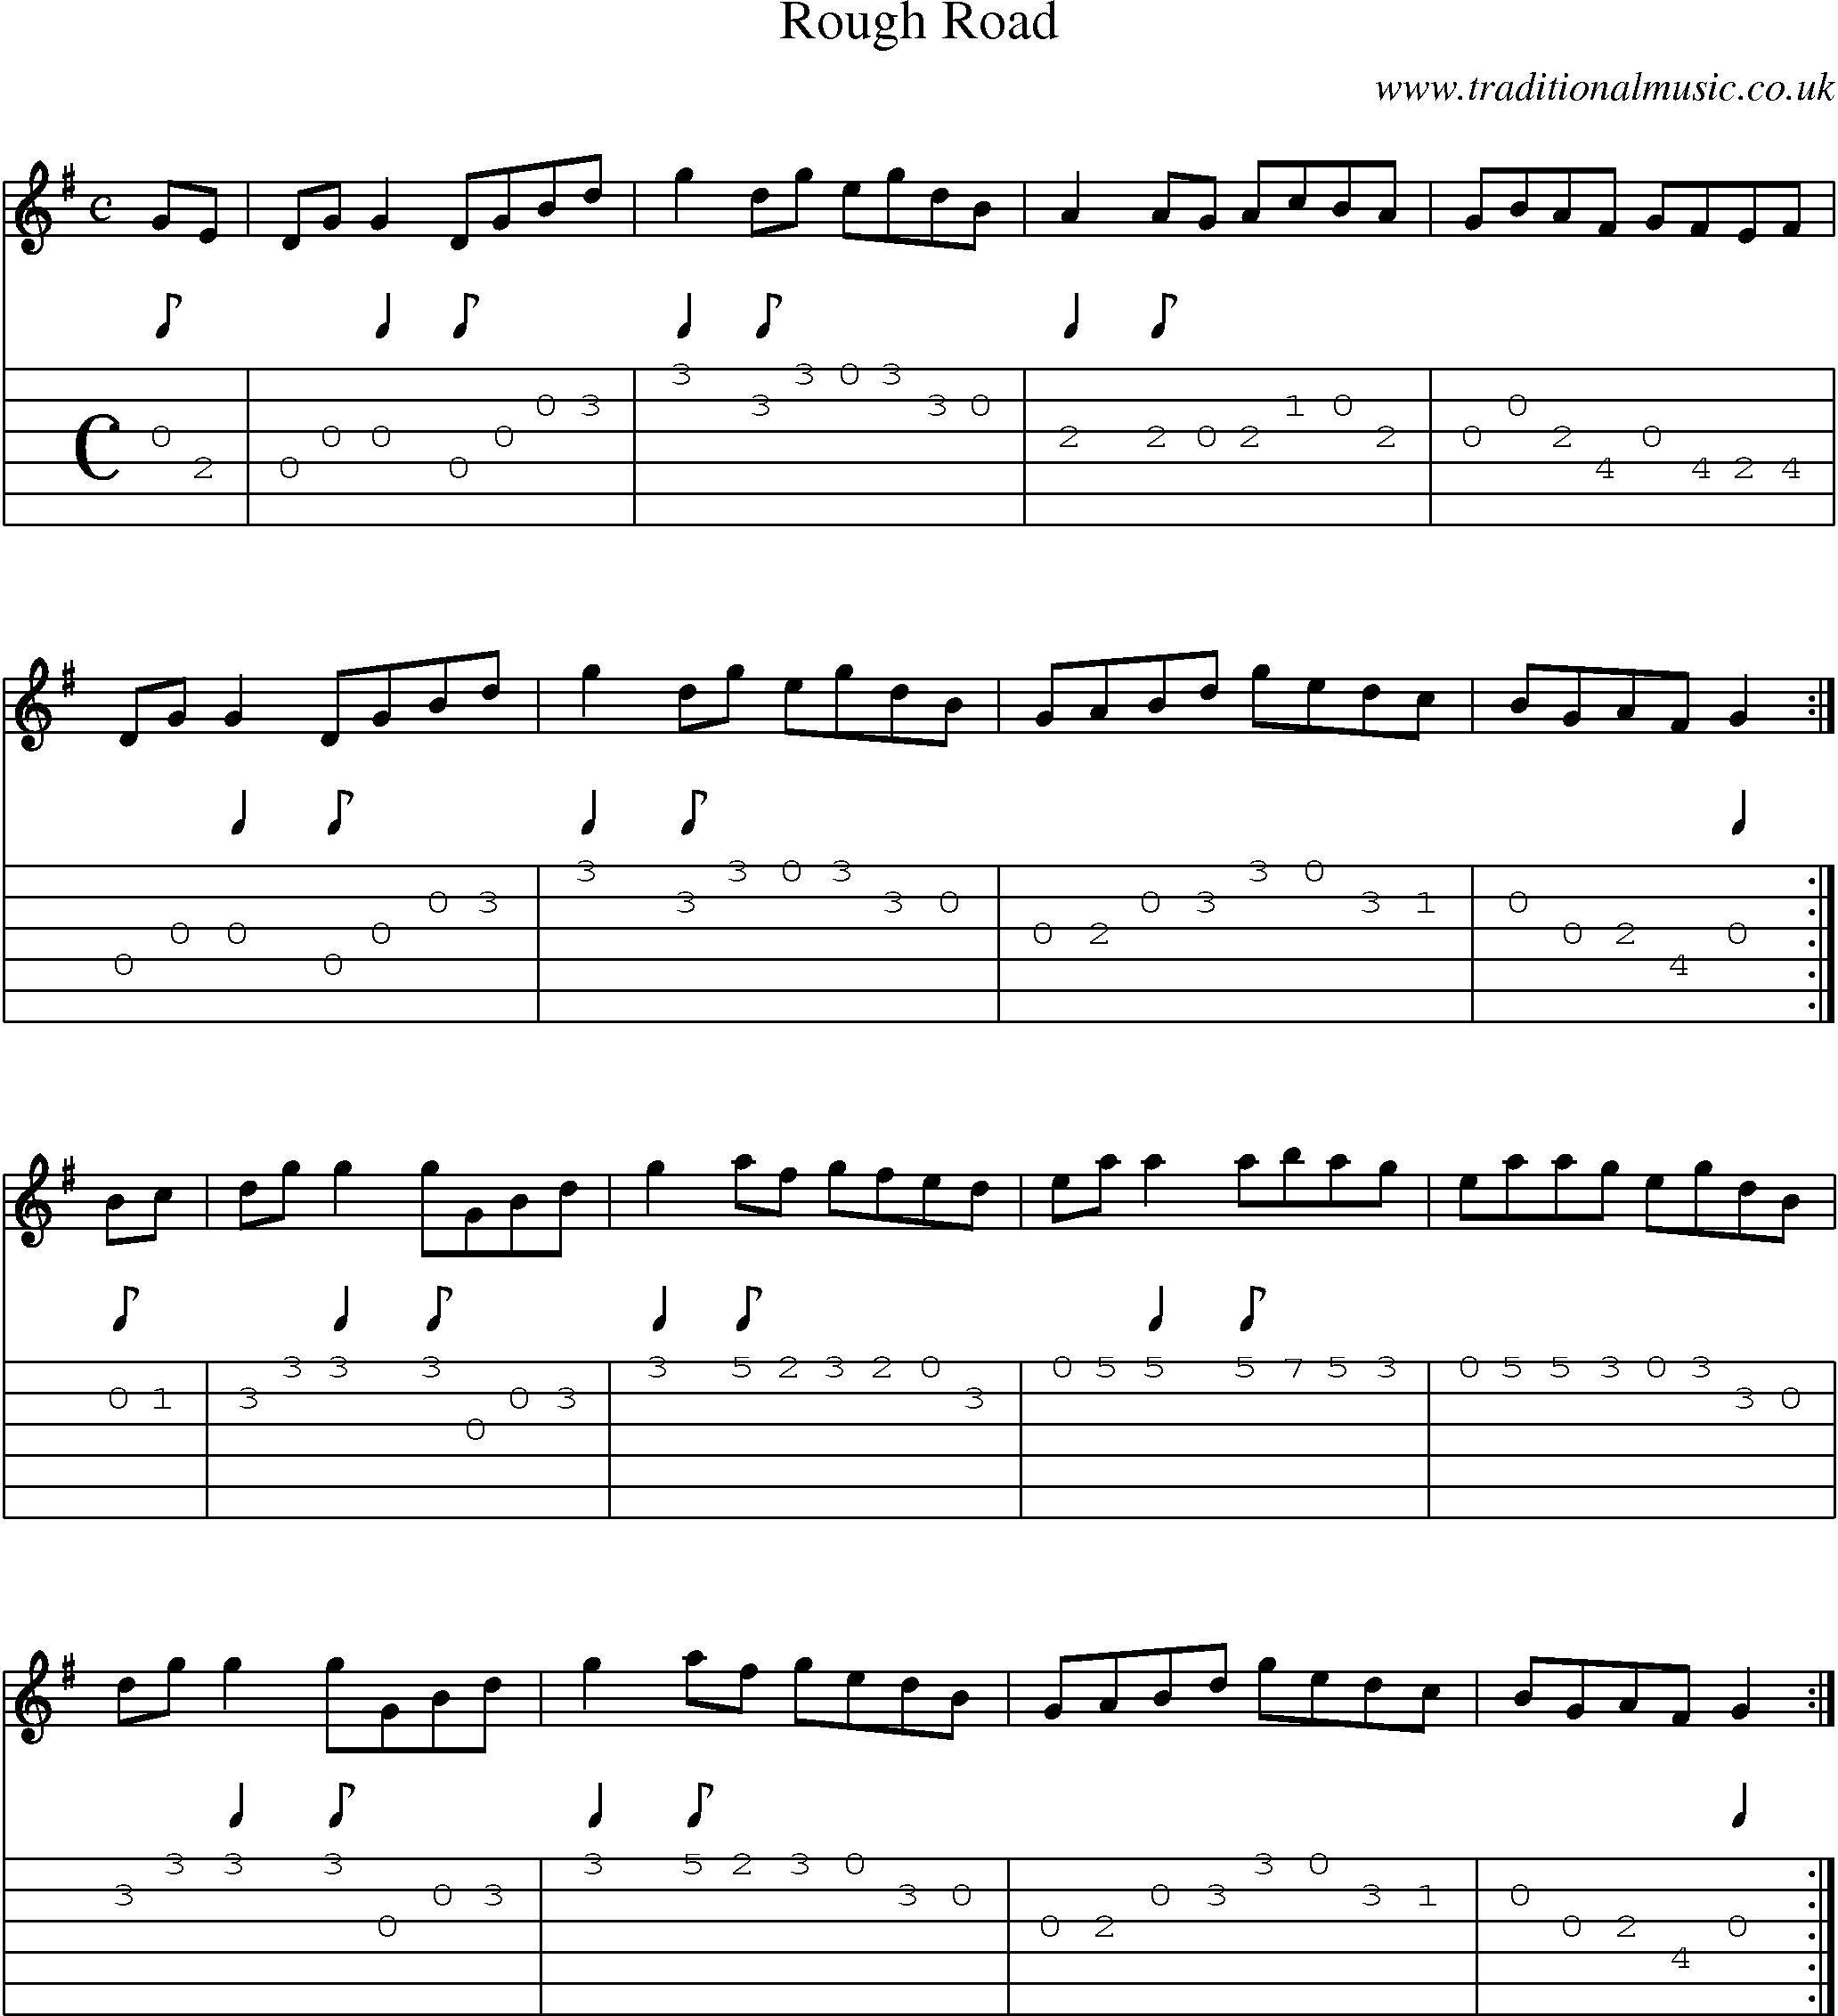 Music Score and Guitar Tabs for Rough Road